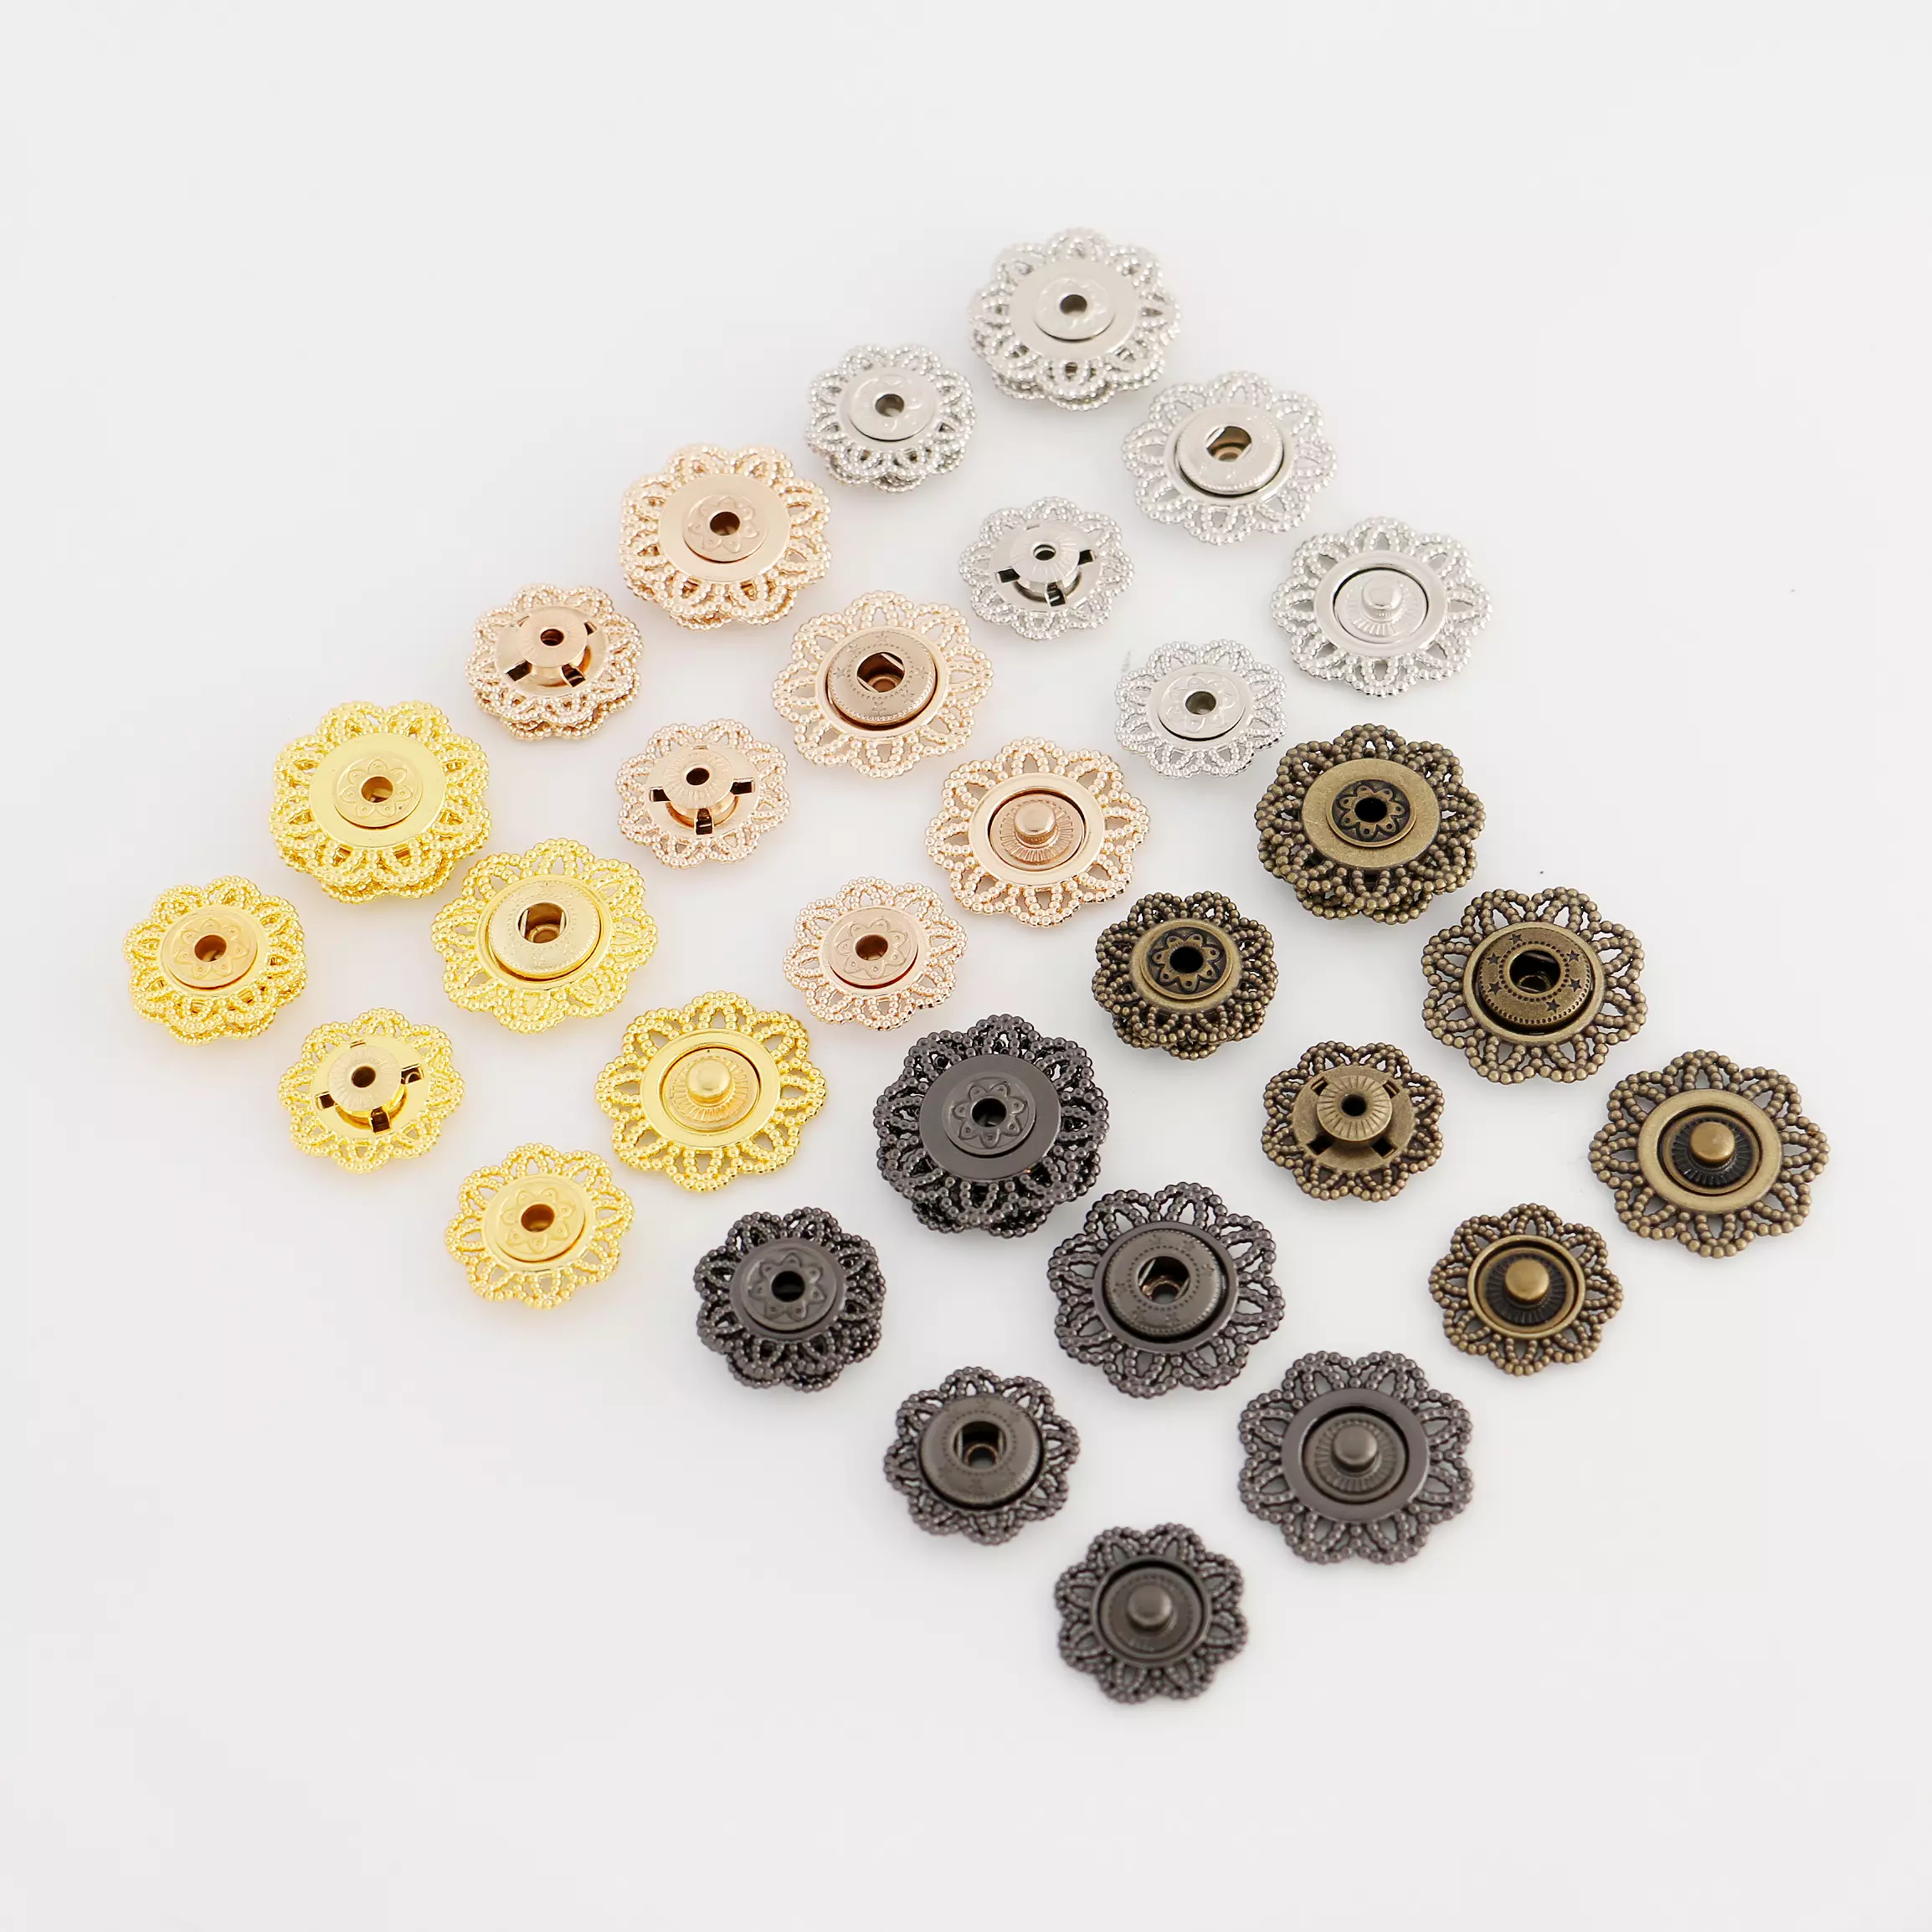 Fabric Covered Snap Buttons For Easy Fastening And Embellishment 